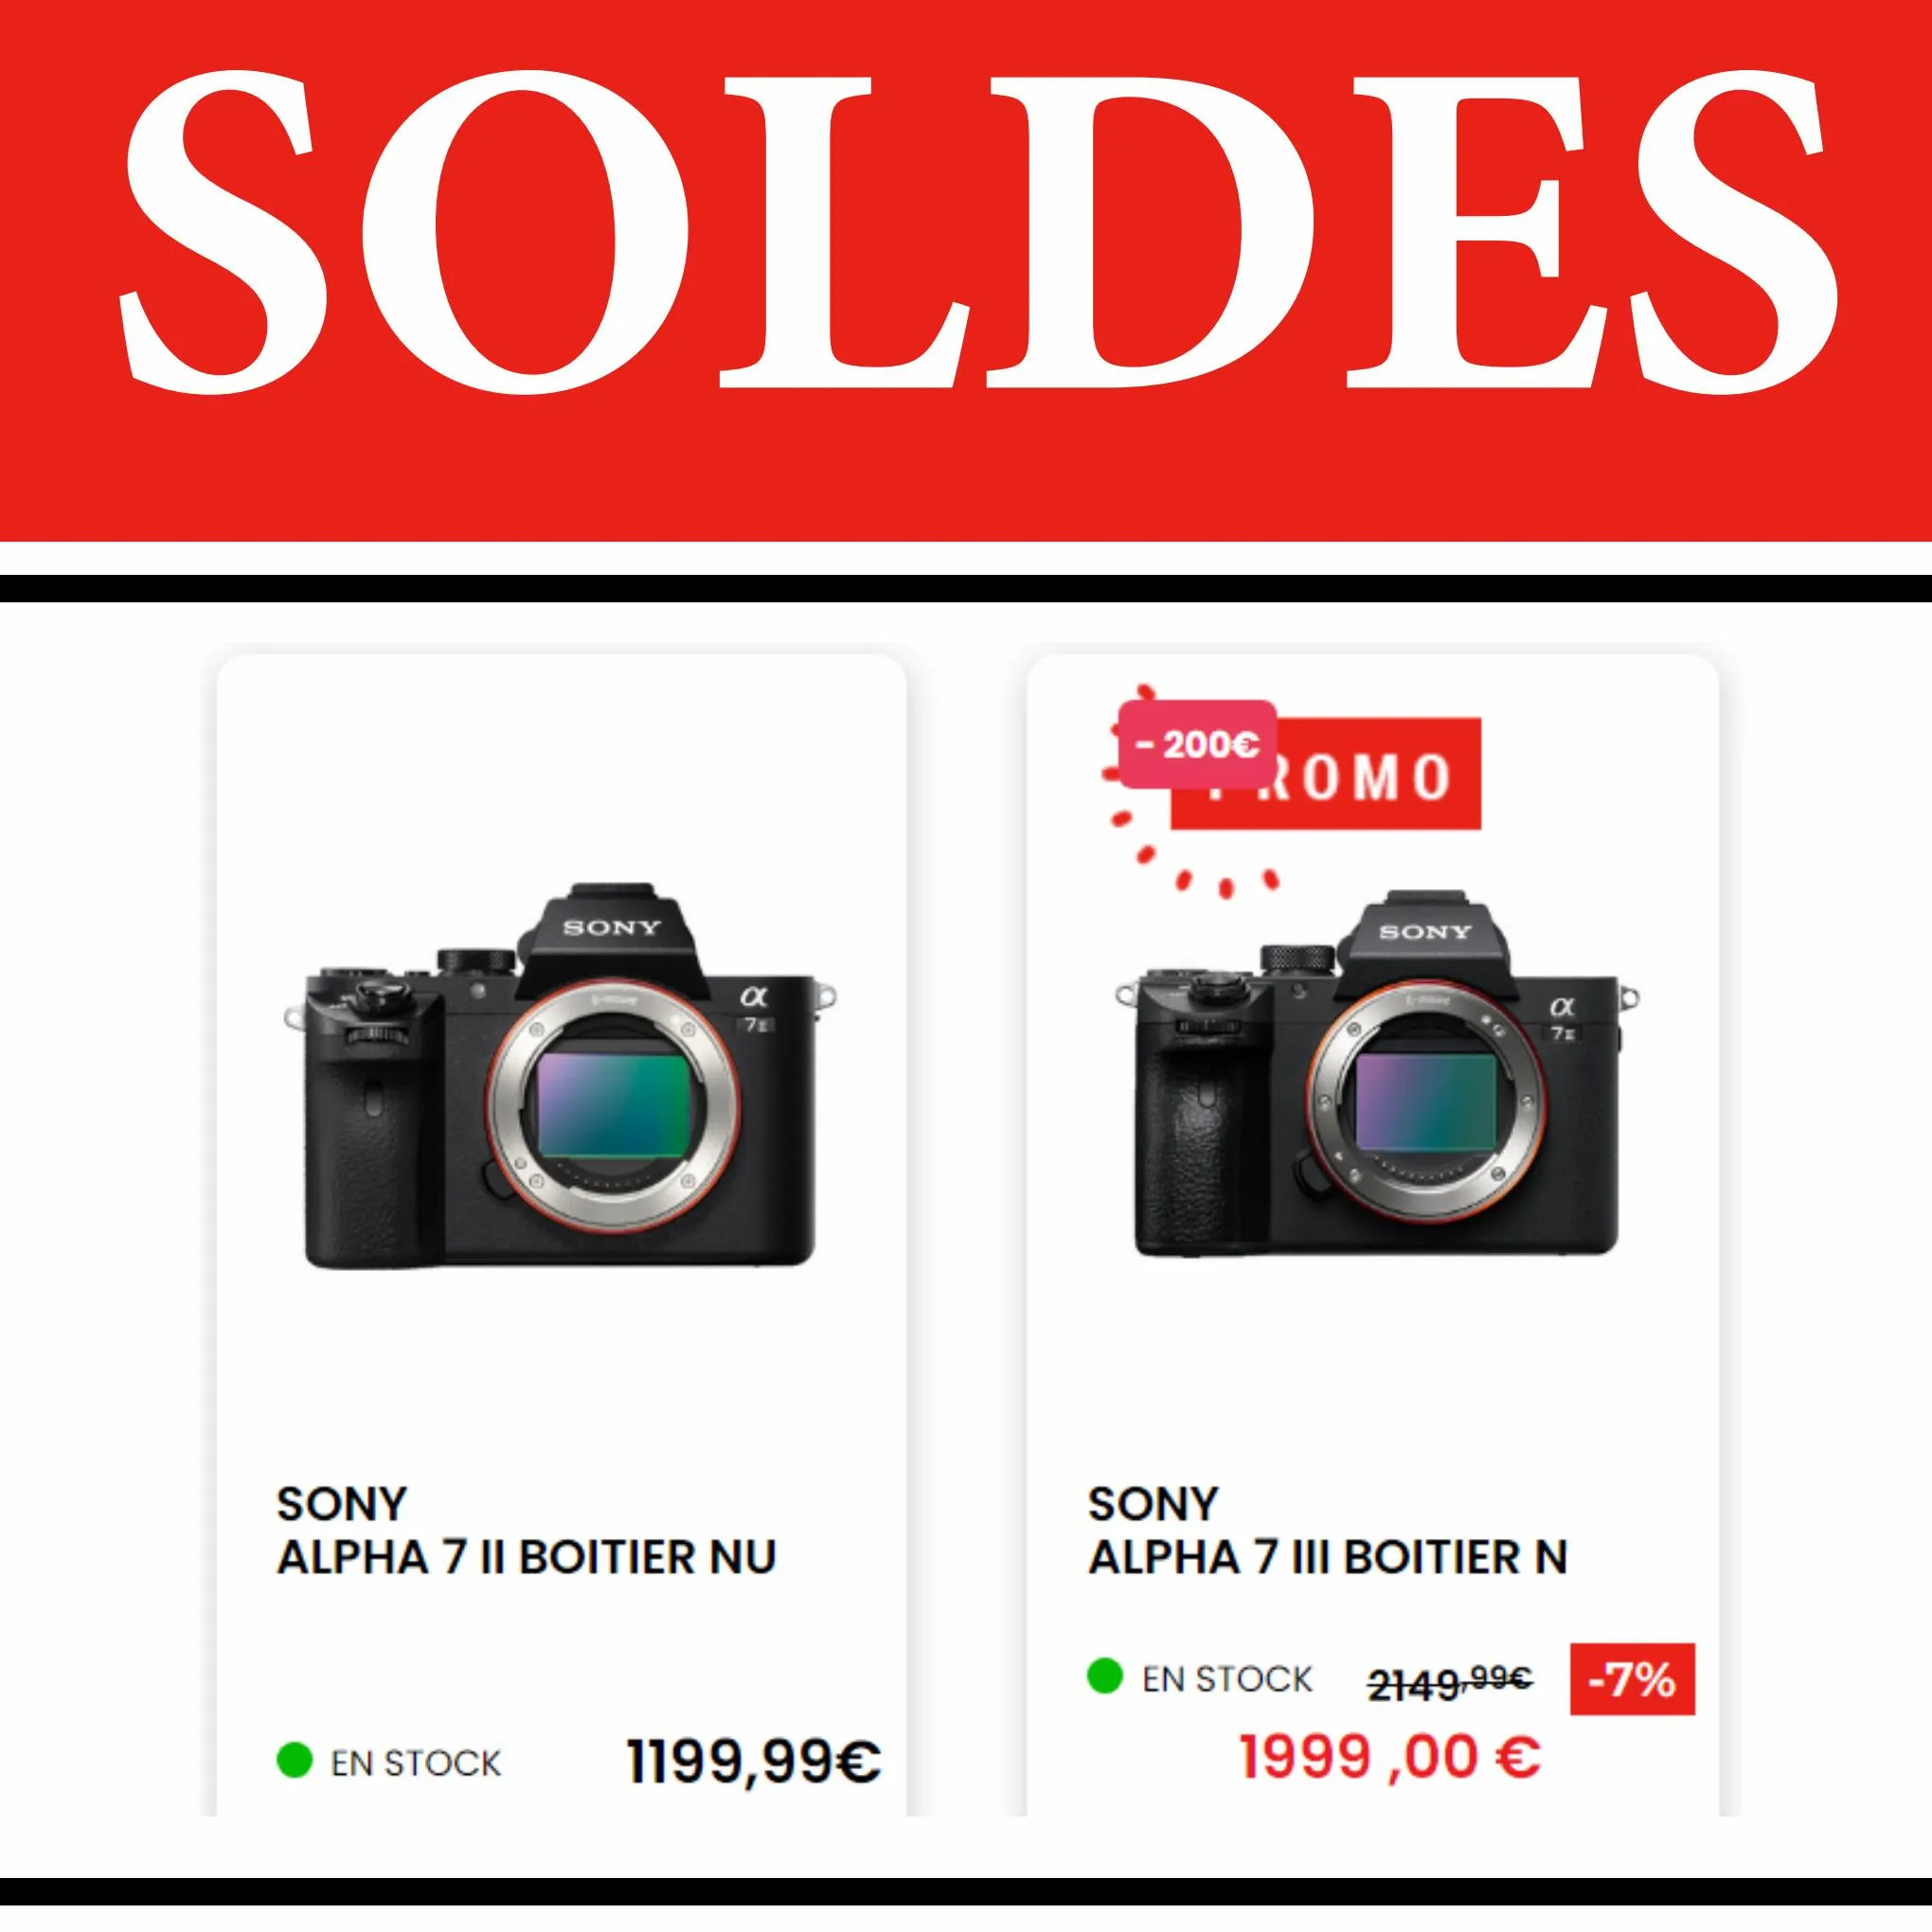 Catalogue Phox Soldes, page 00002